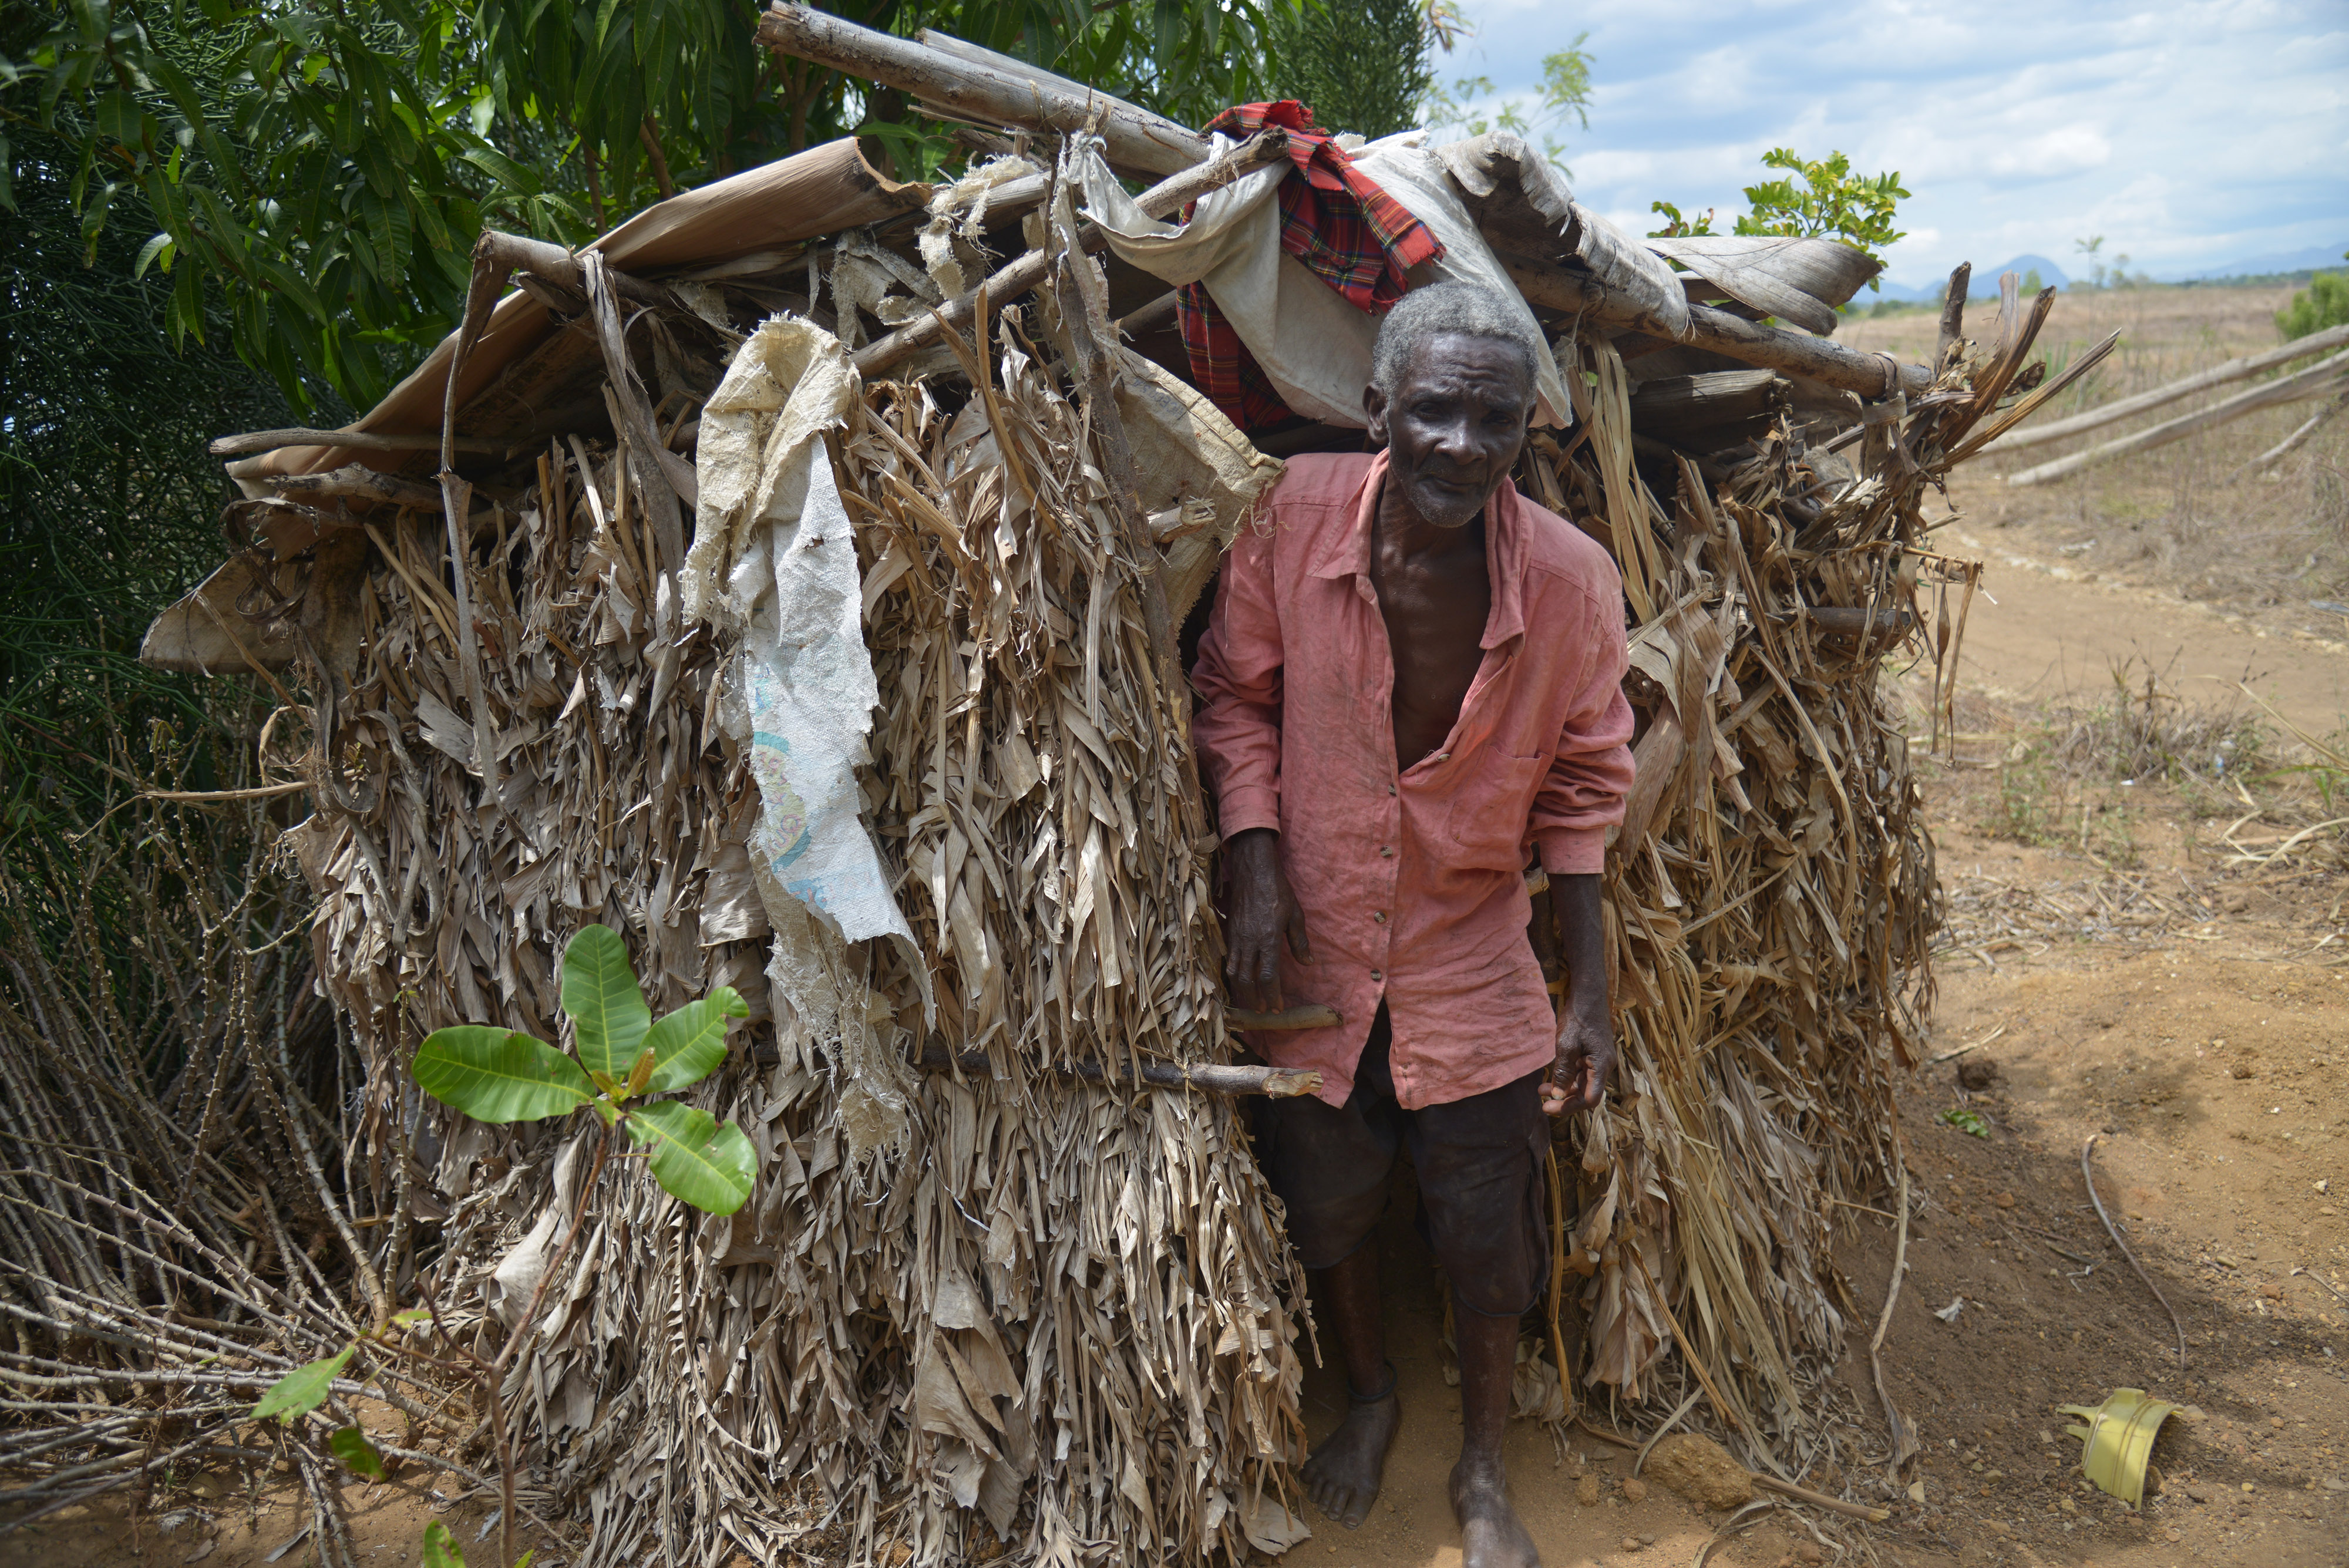 Polès Monpremier, a 62 year-old grandfather, coming out of his proudly built latrine